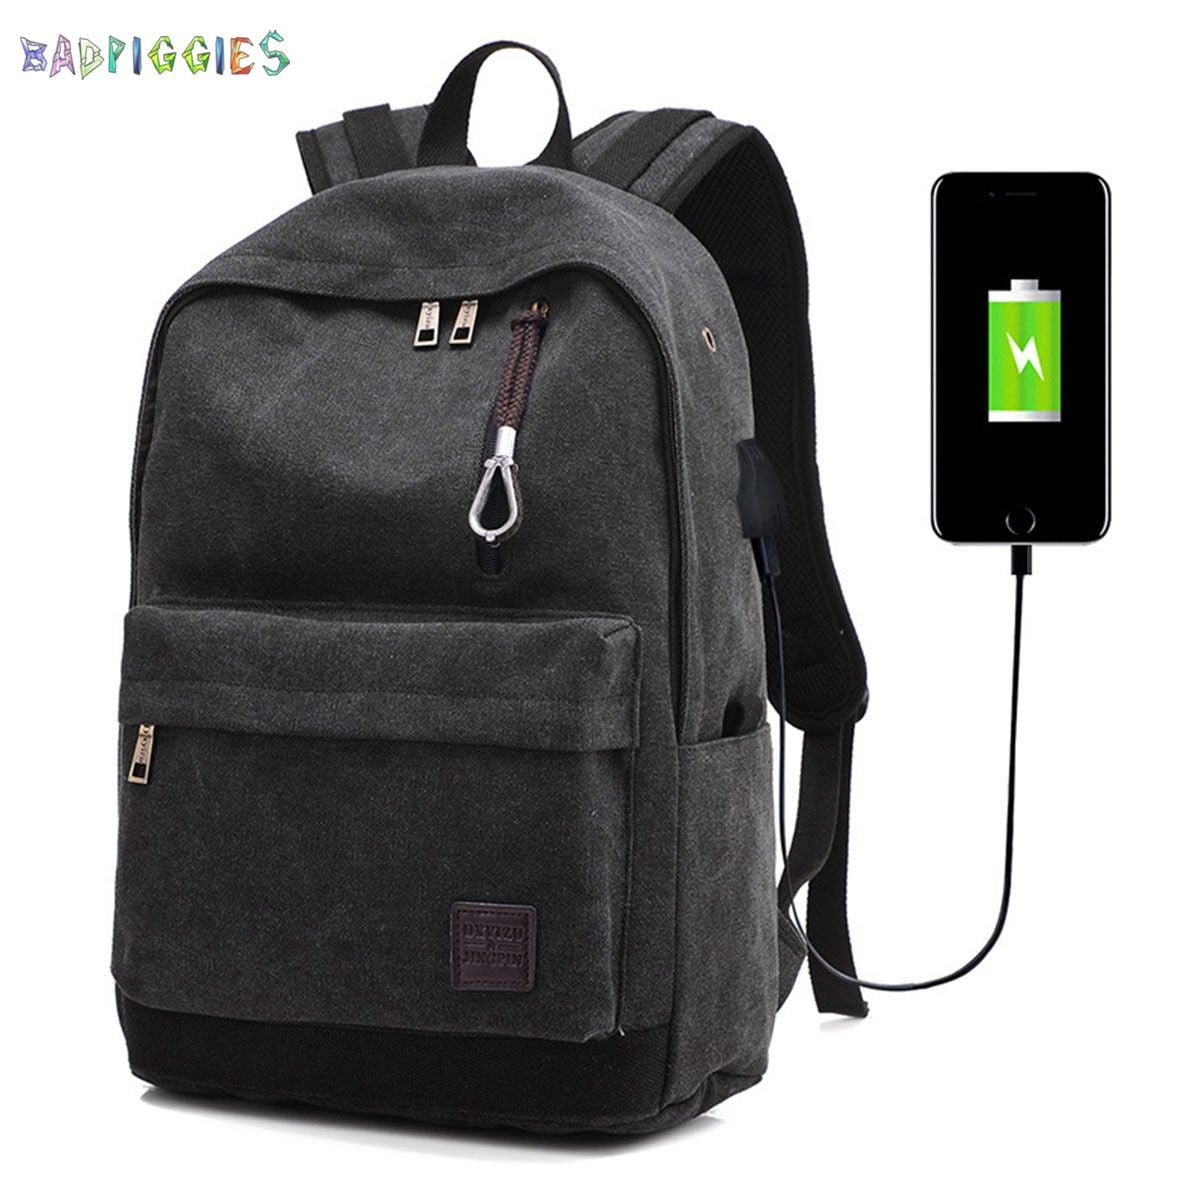 Cute Colored Dinosaurs Laptop Backpack 17 Inch Business Travel Backpacks School Backpacks with USB Charging Port for Casual Hiking